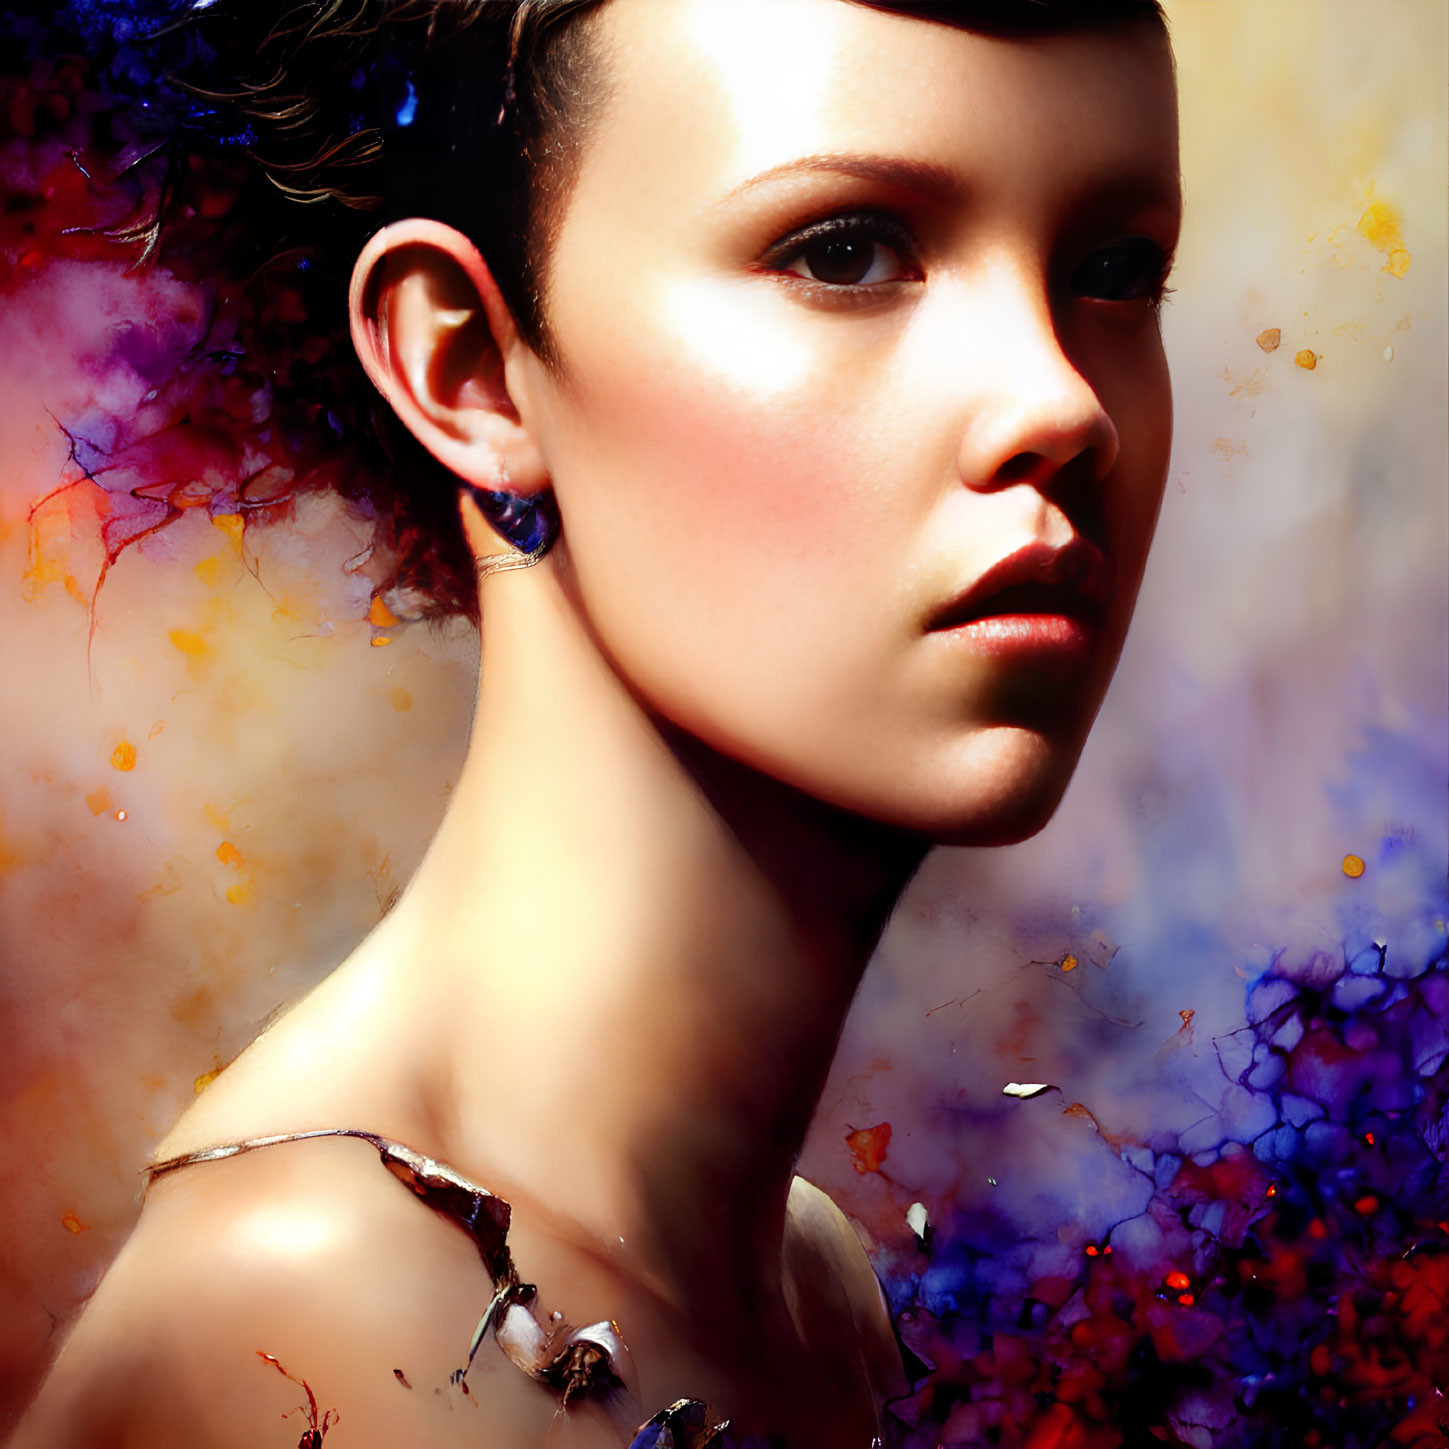 Portrait of Person with Short Hair Against Colorful Abstract Background